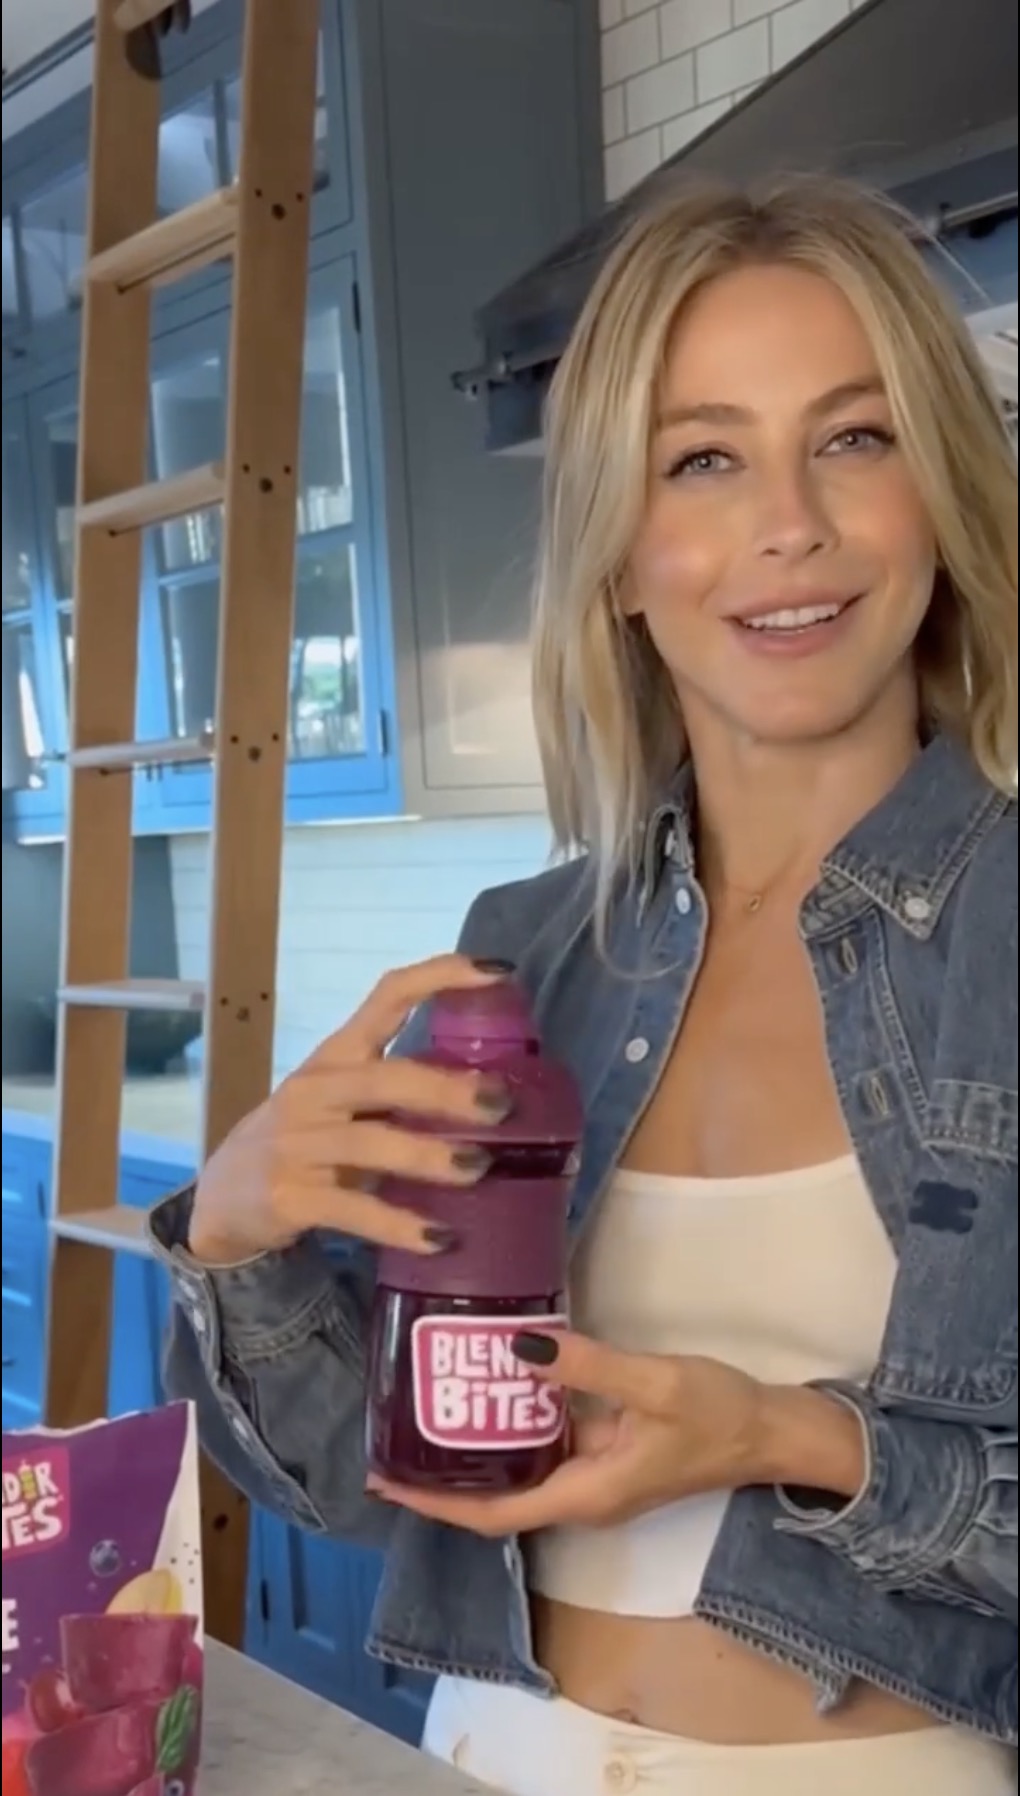 The star shared a long video of herself promoting a health drink in her kitchen